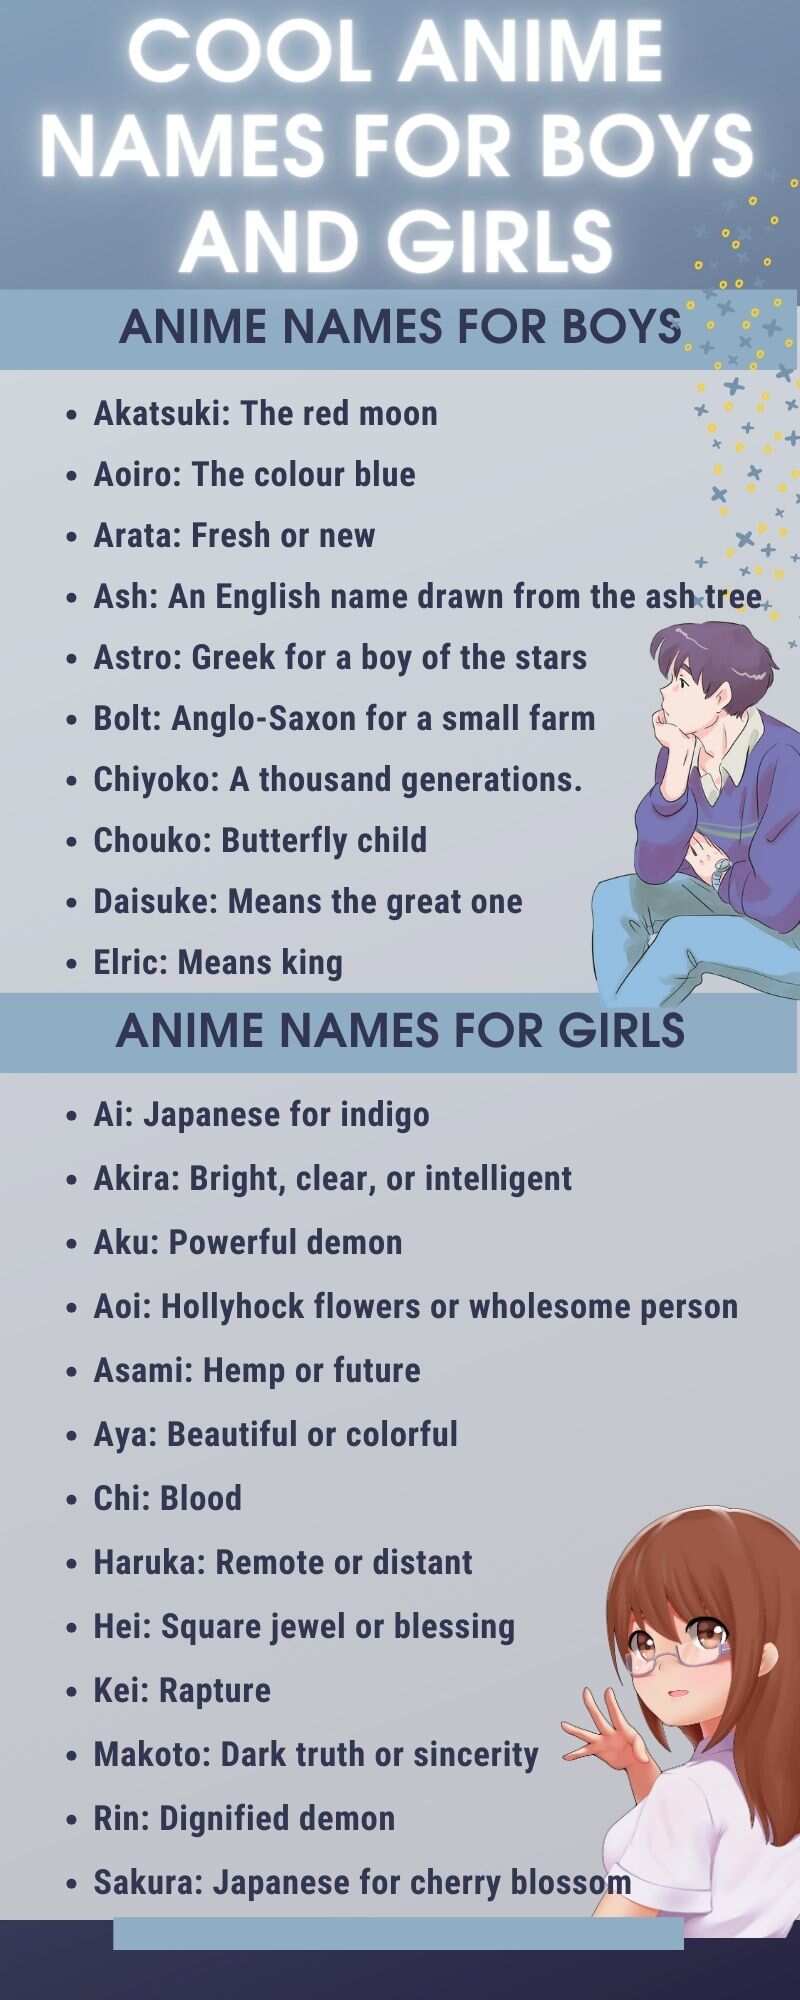 Сool anime names for boys and girls